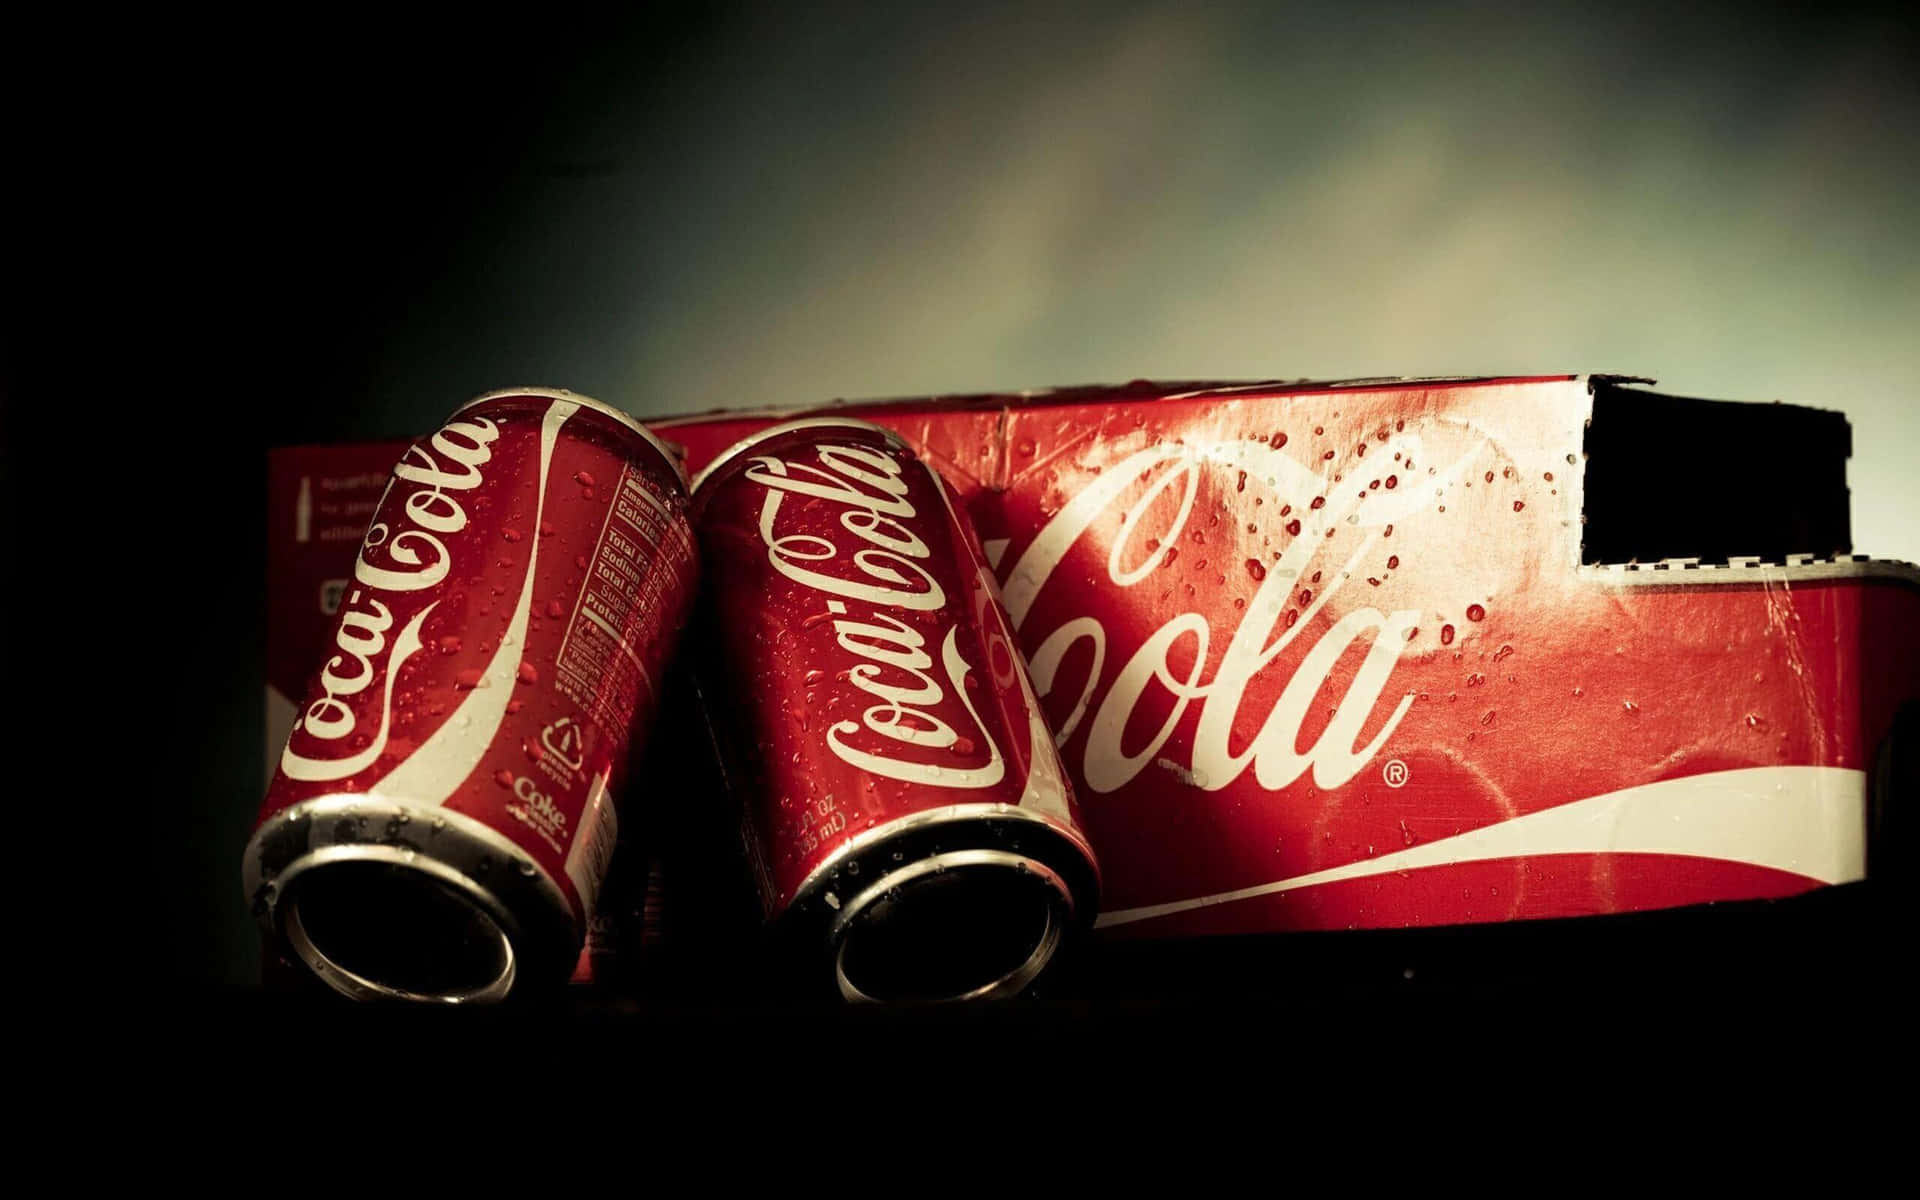 Coca Cola Cans On A Black Background